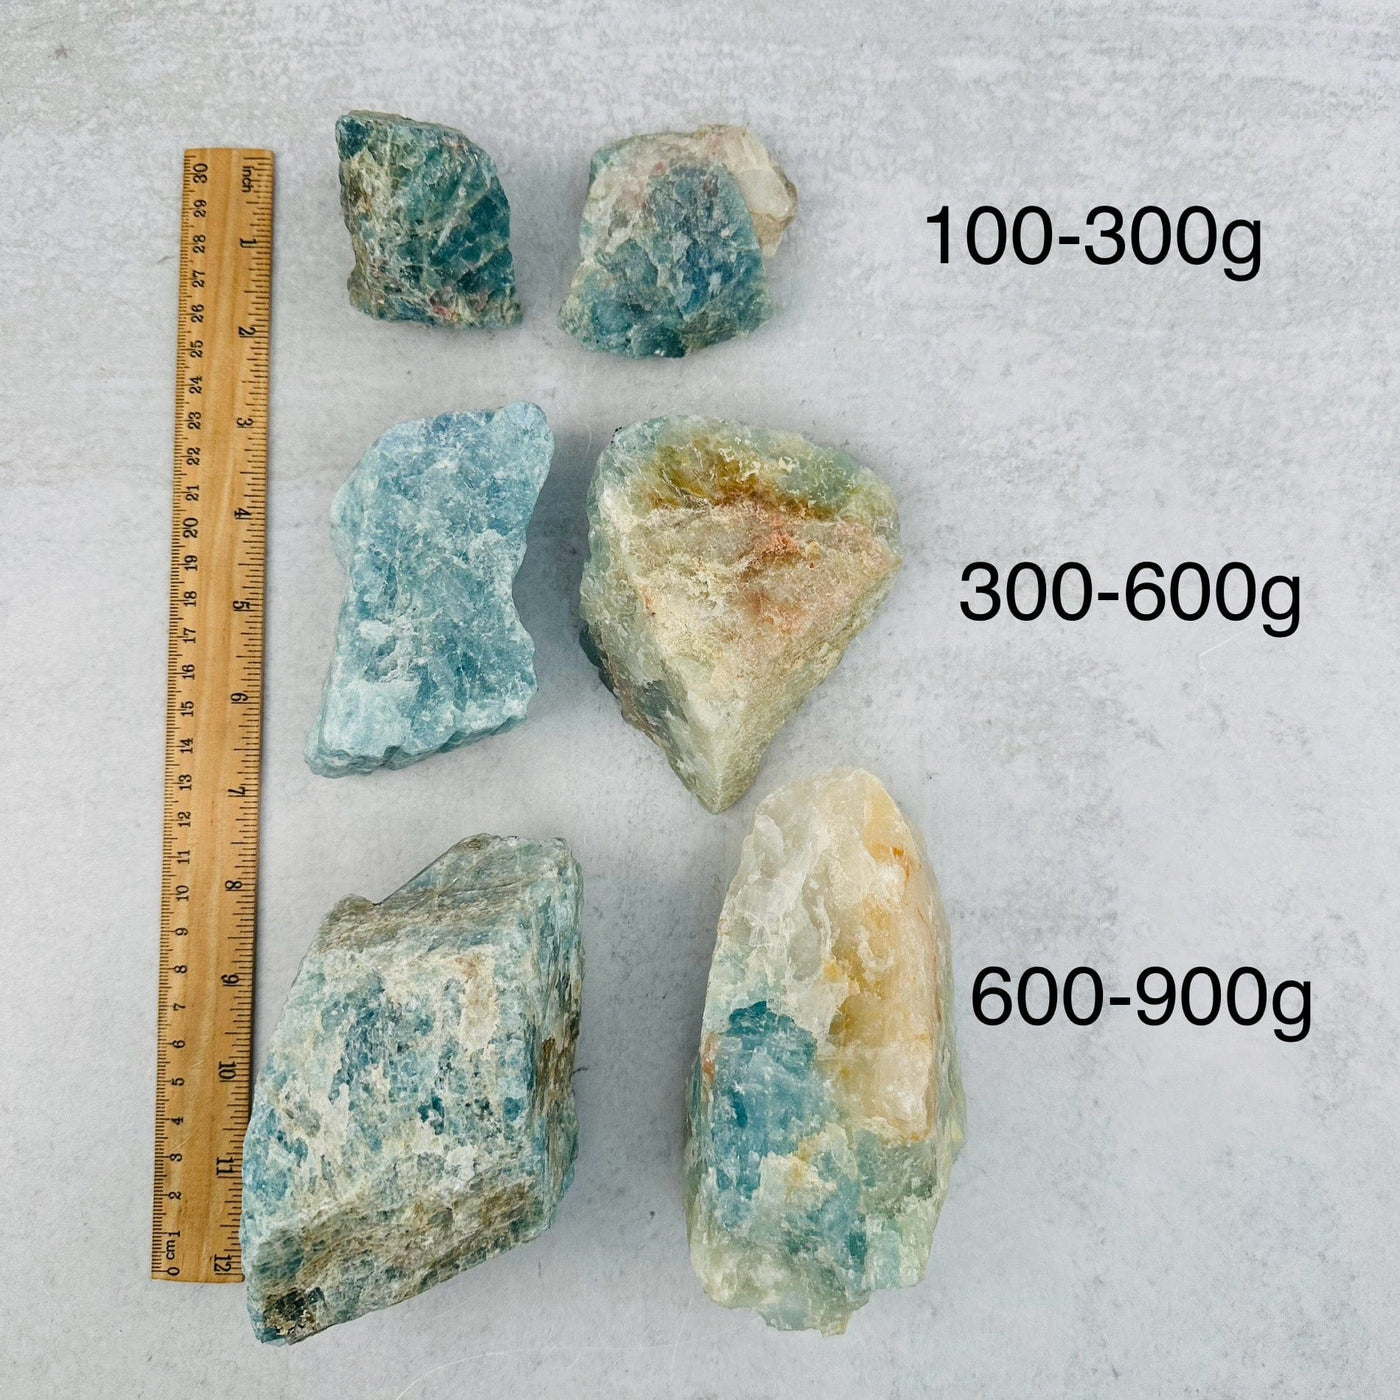 Rough Aquamarine - By Weight - next to a ruler for size reference 